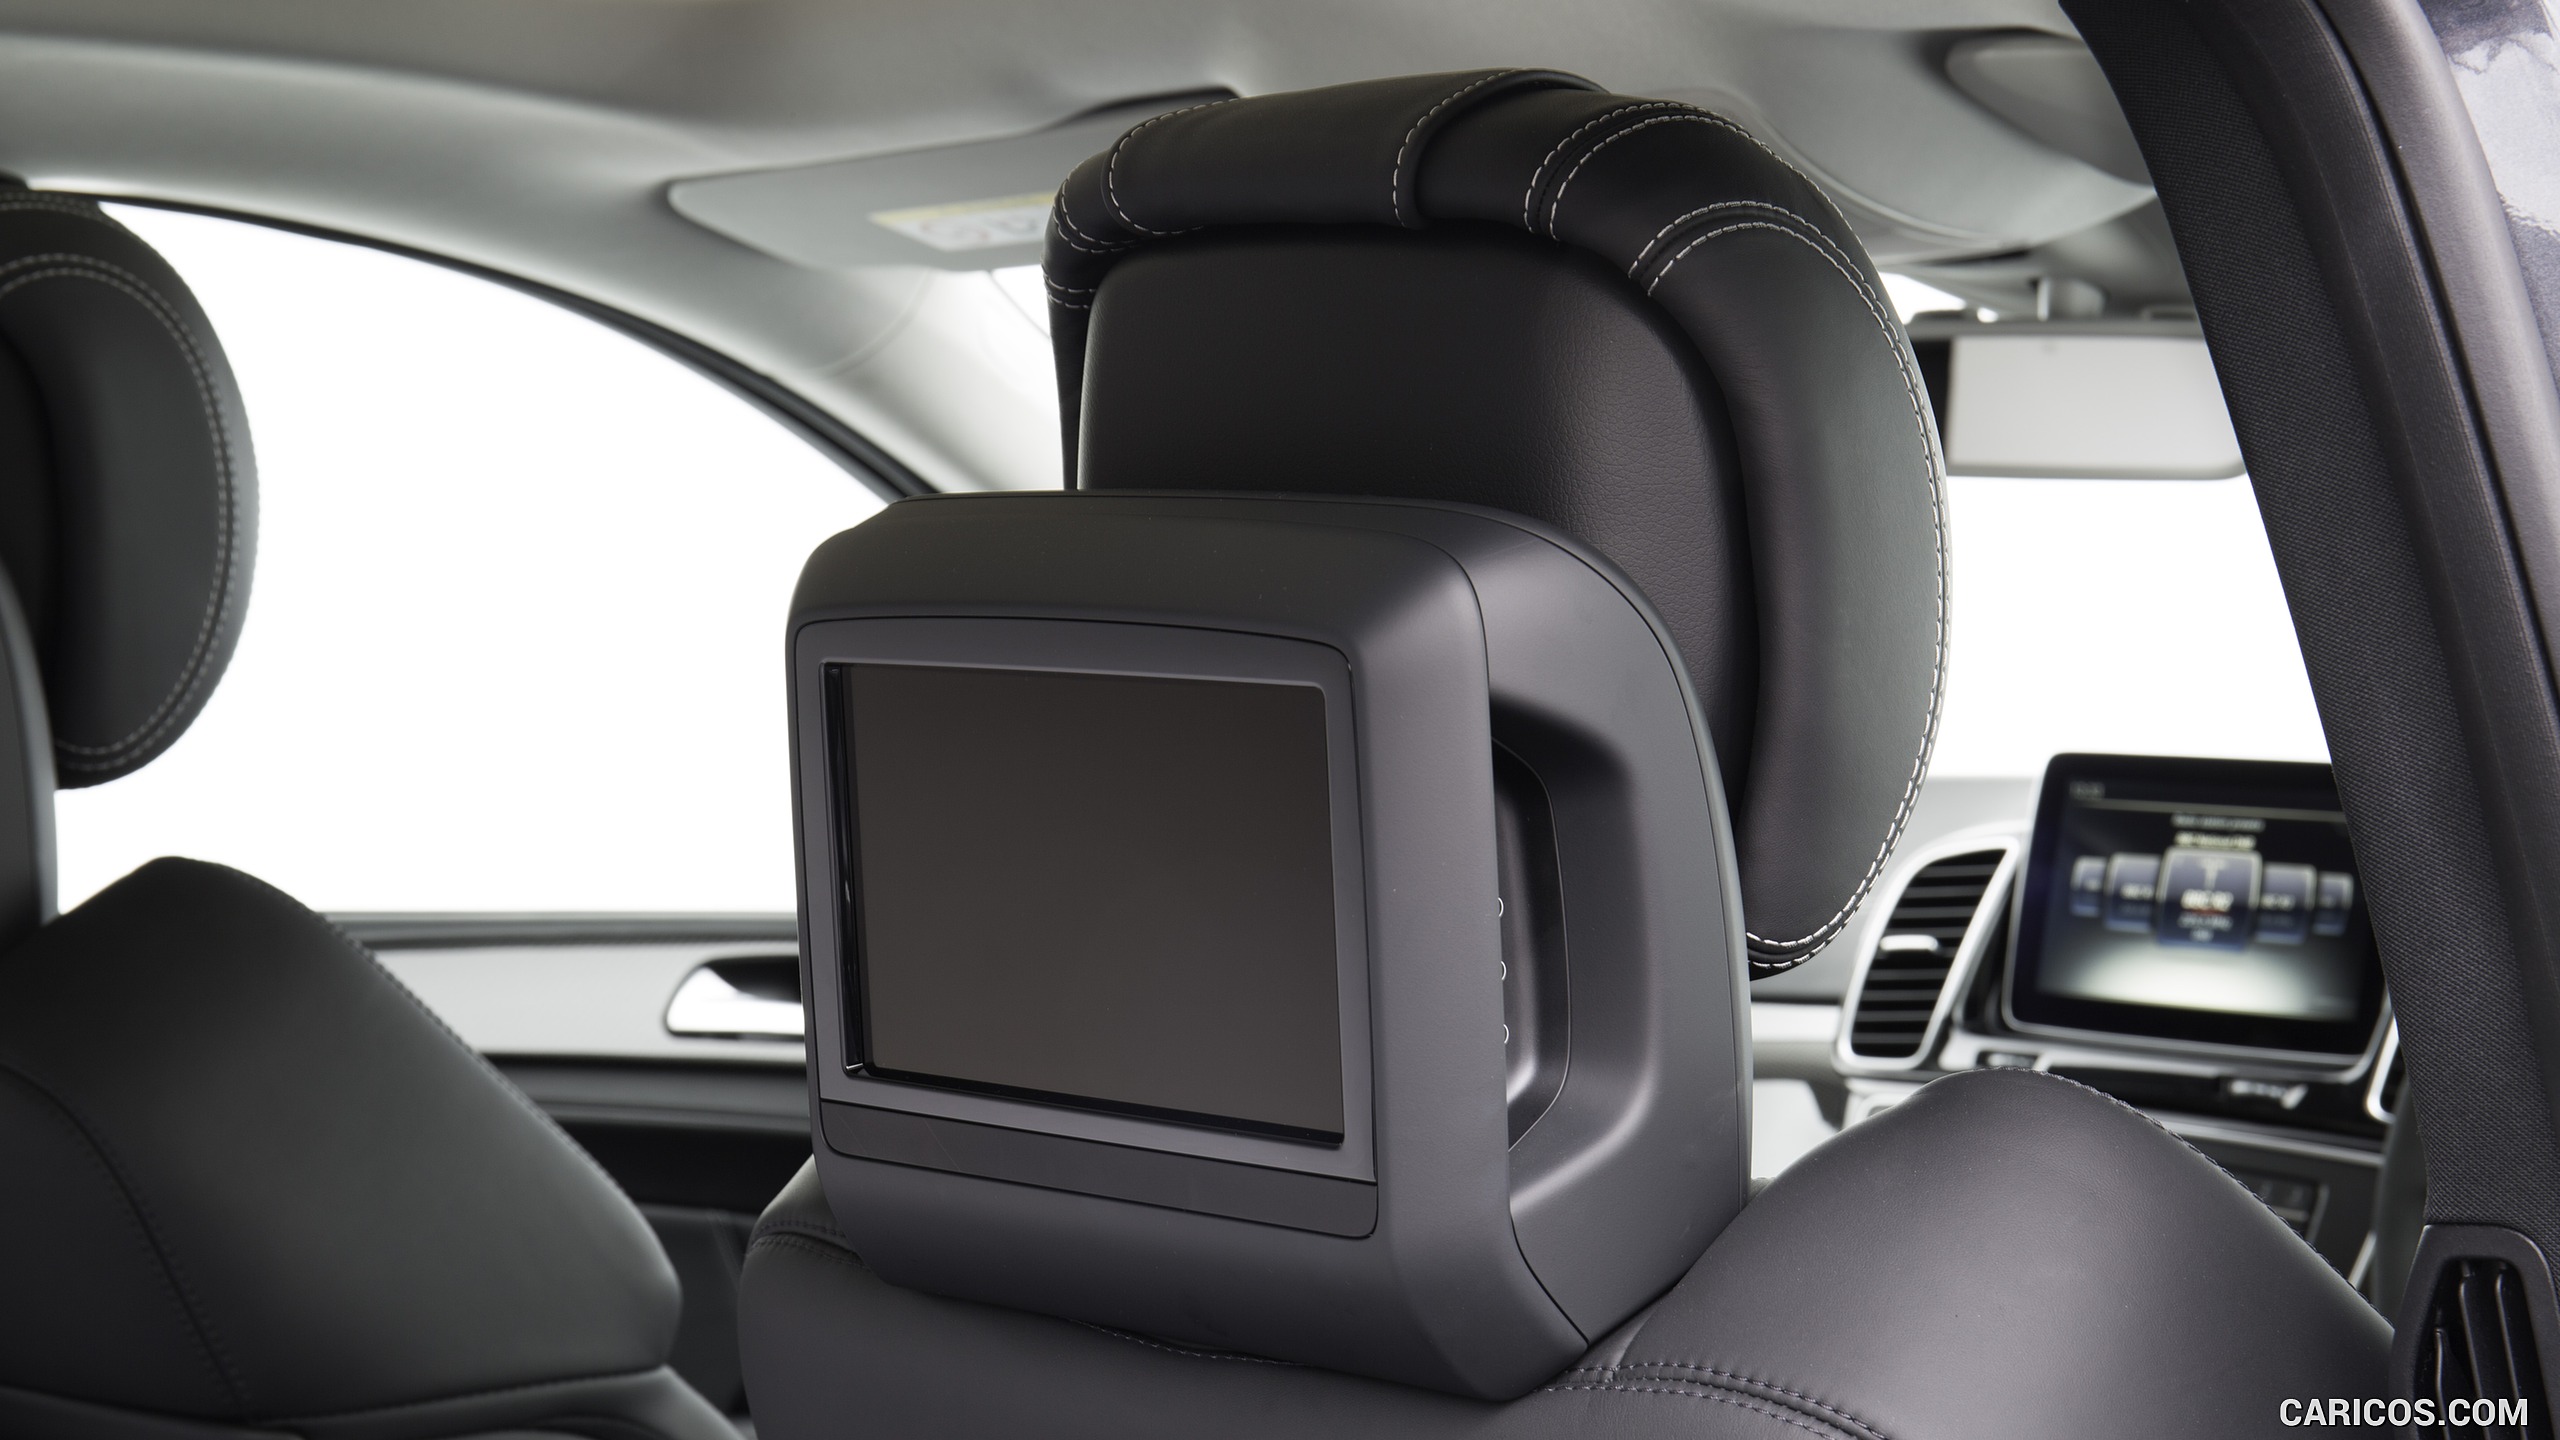 2016 Mercedes-AMG GLE 63 S Coupe (UK-Spec) - Rear Seat Entertainment System, #65 of 65